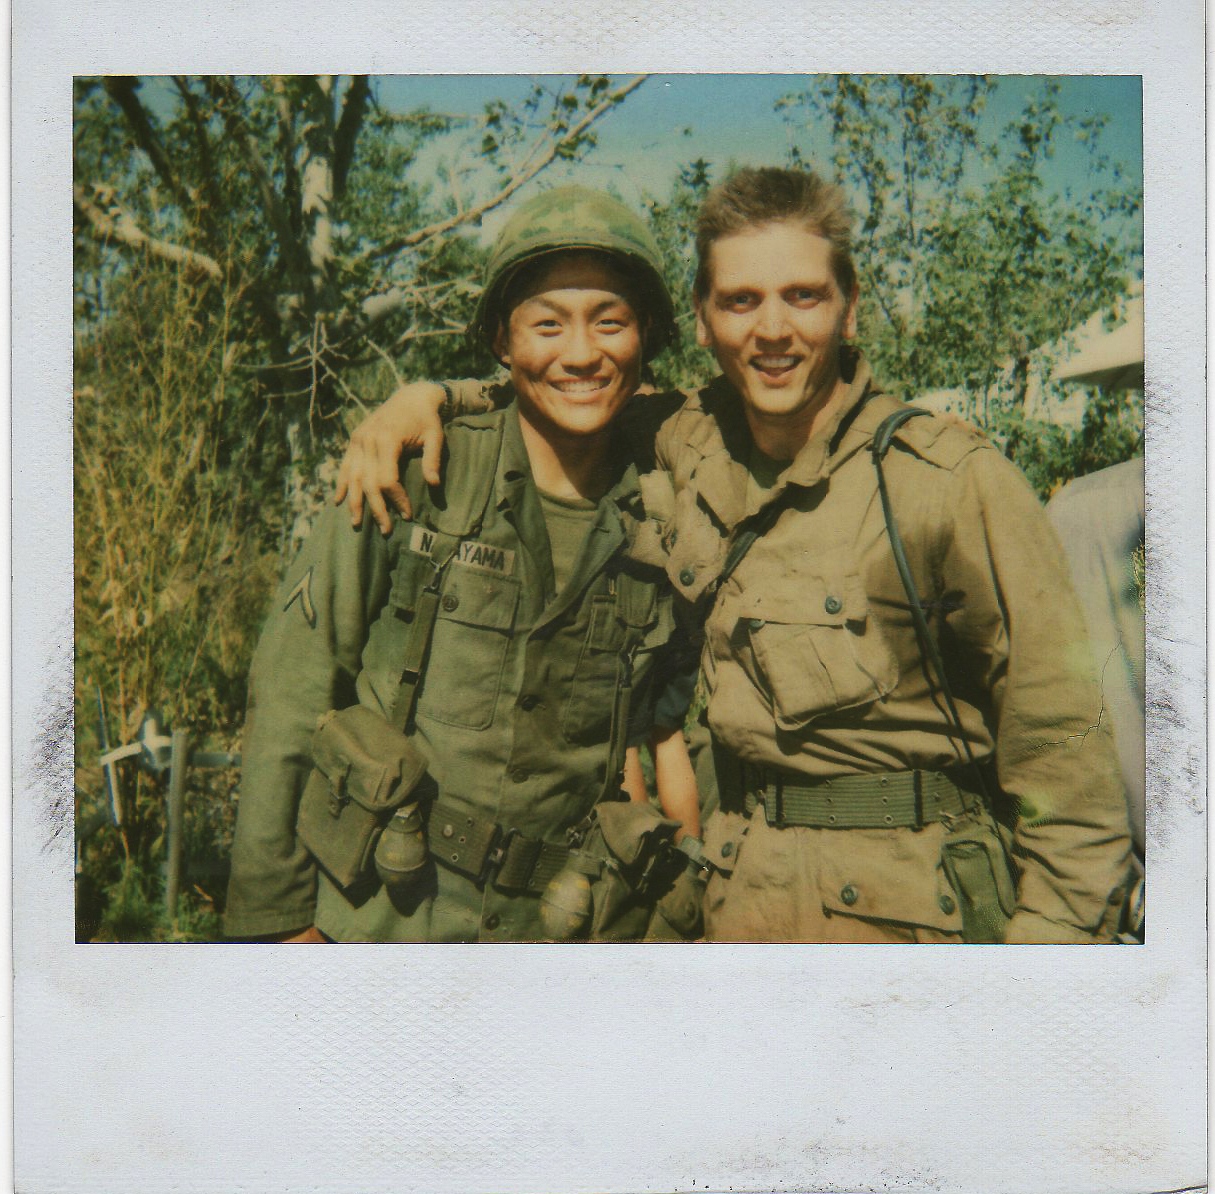 Brian Tee and Barry Pepper on the set of We Were Soldiers